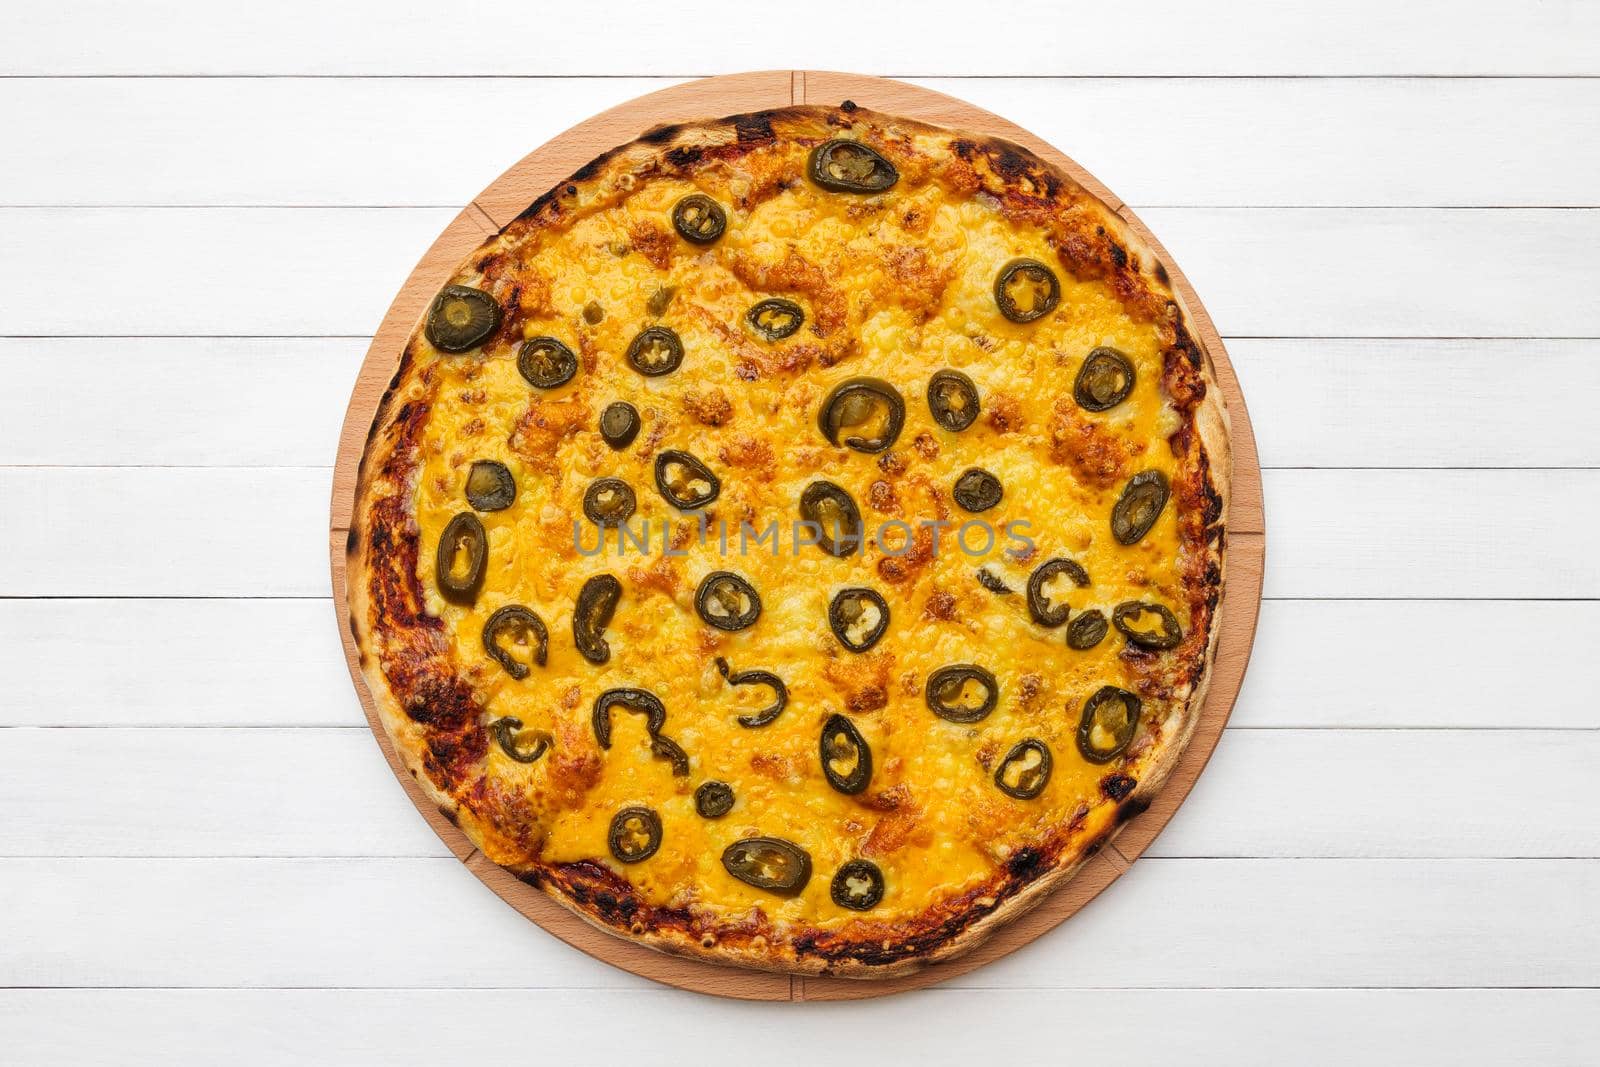 Whole round pizza topped with olives and cheese on wooden plate. Top view on white board background. Copy space.